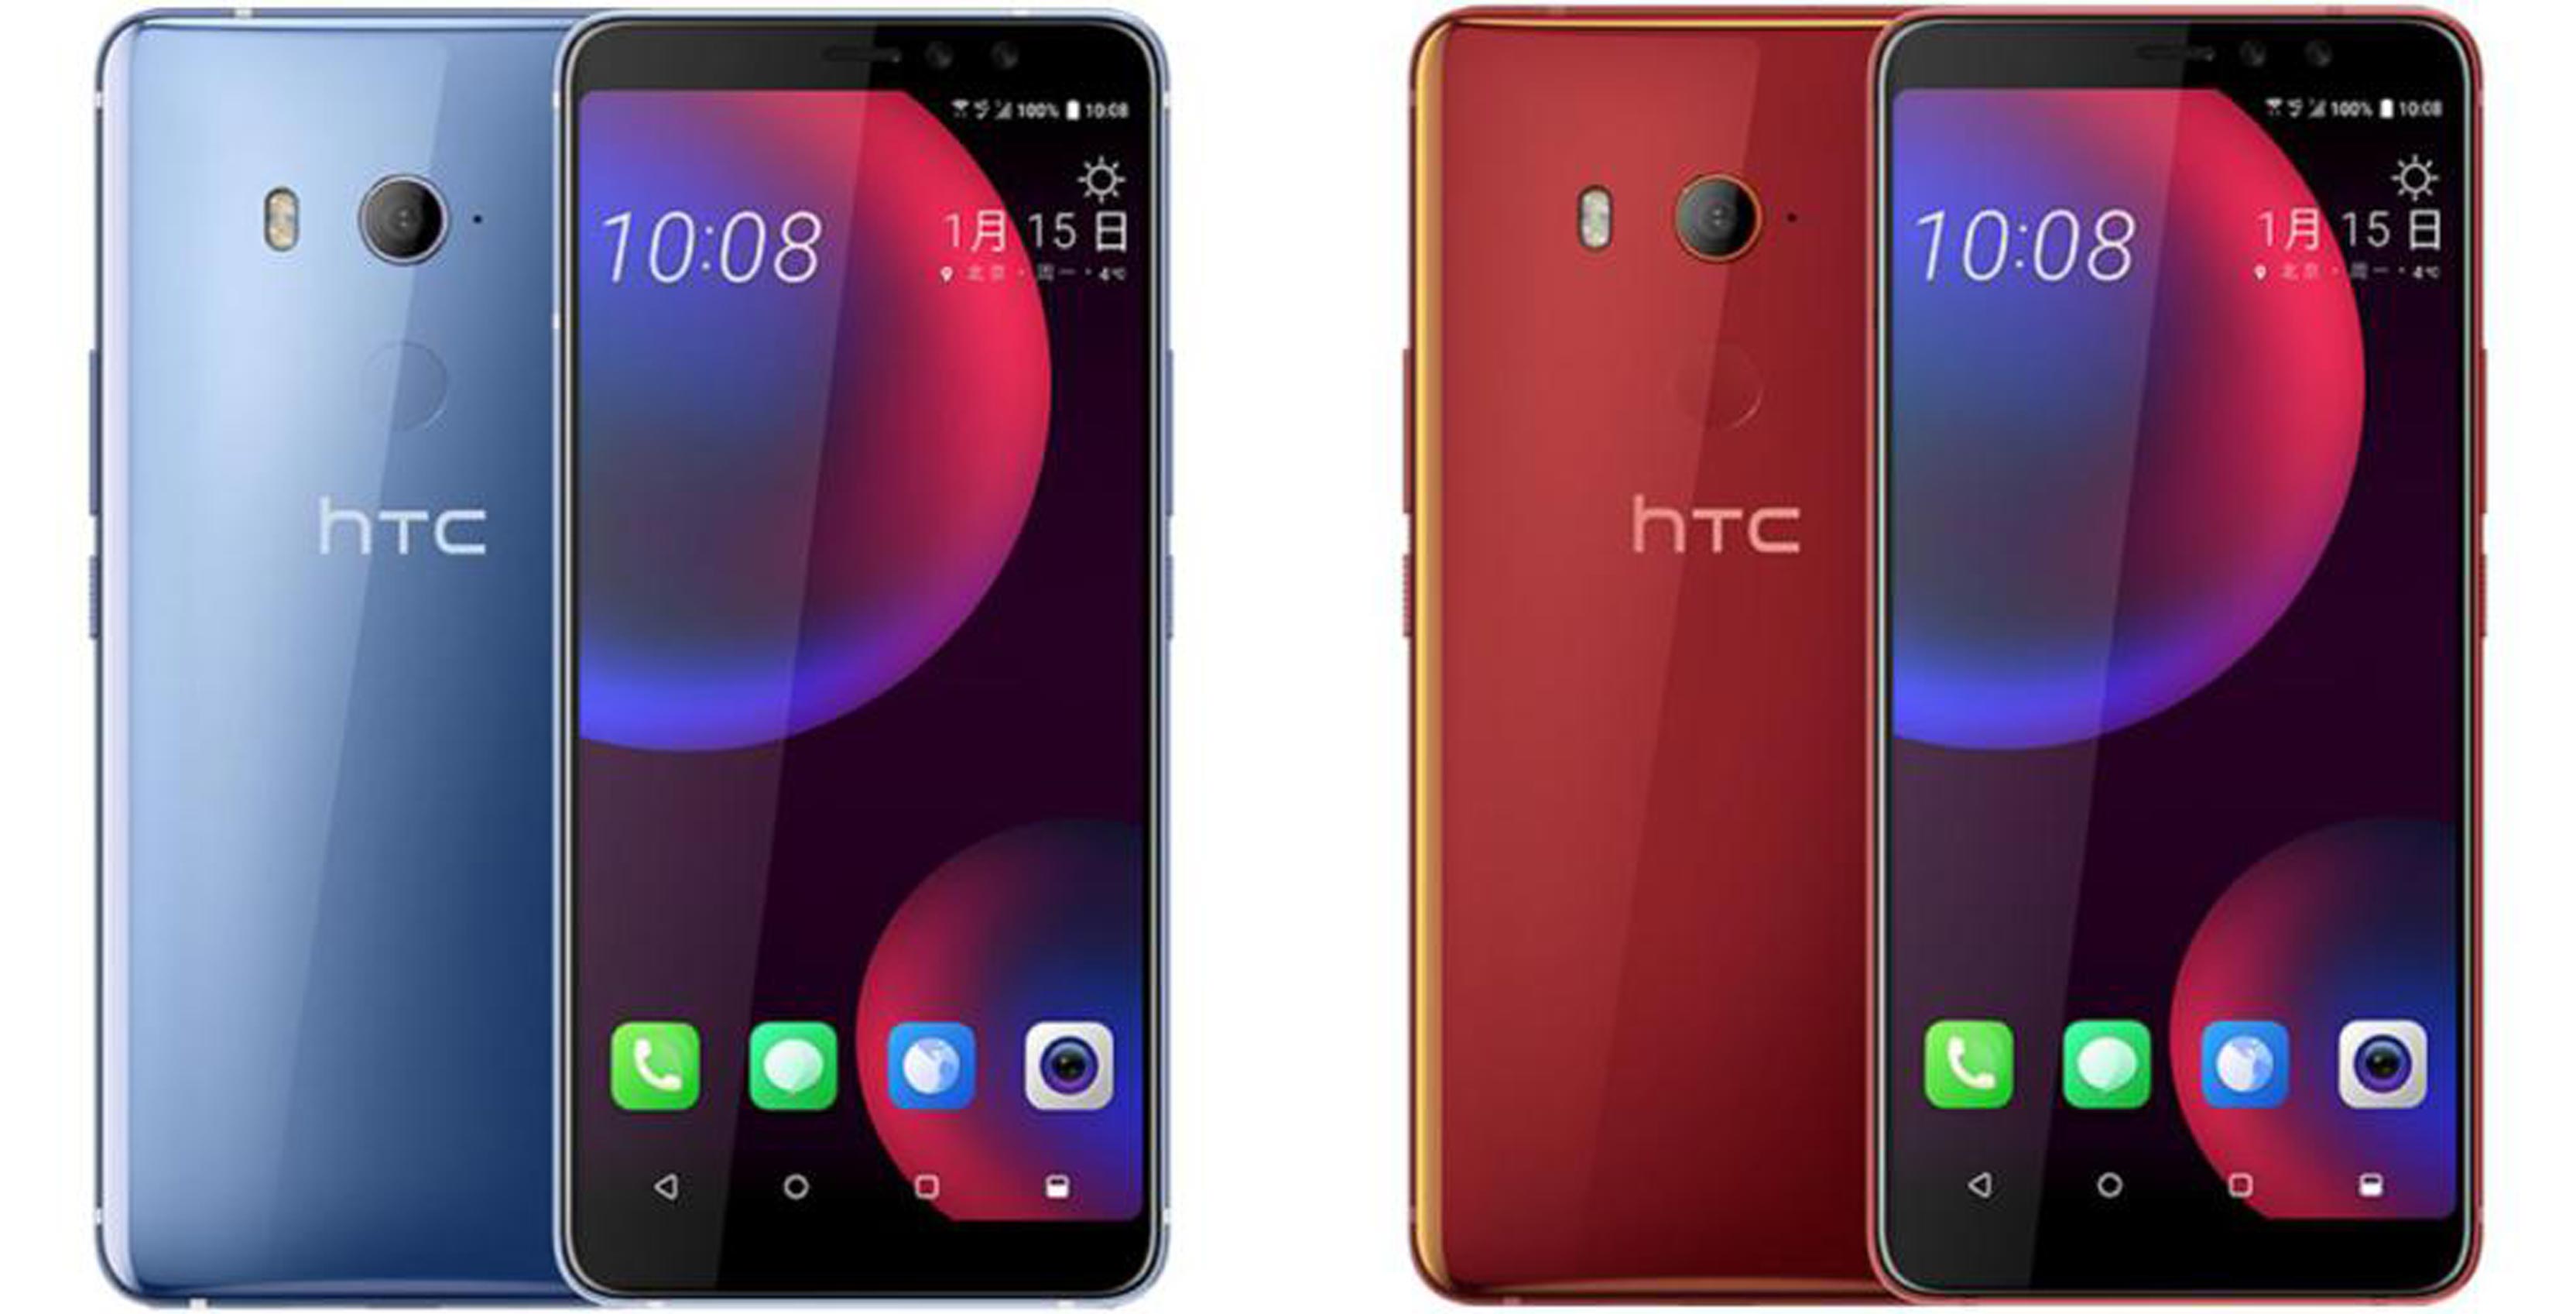 HTC's leaked U11 EYEs smartphone with dual front-facing cameras